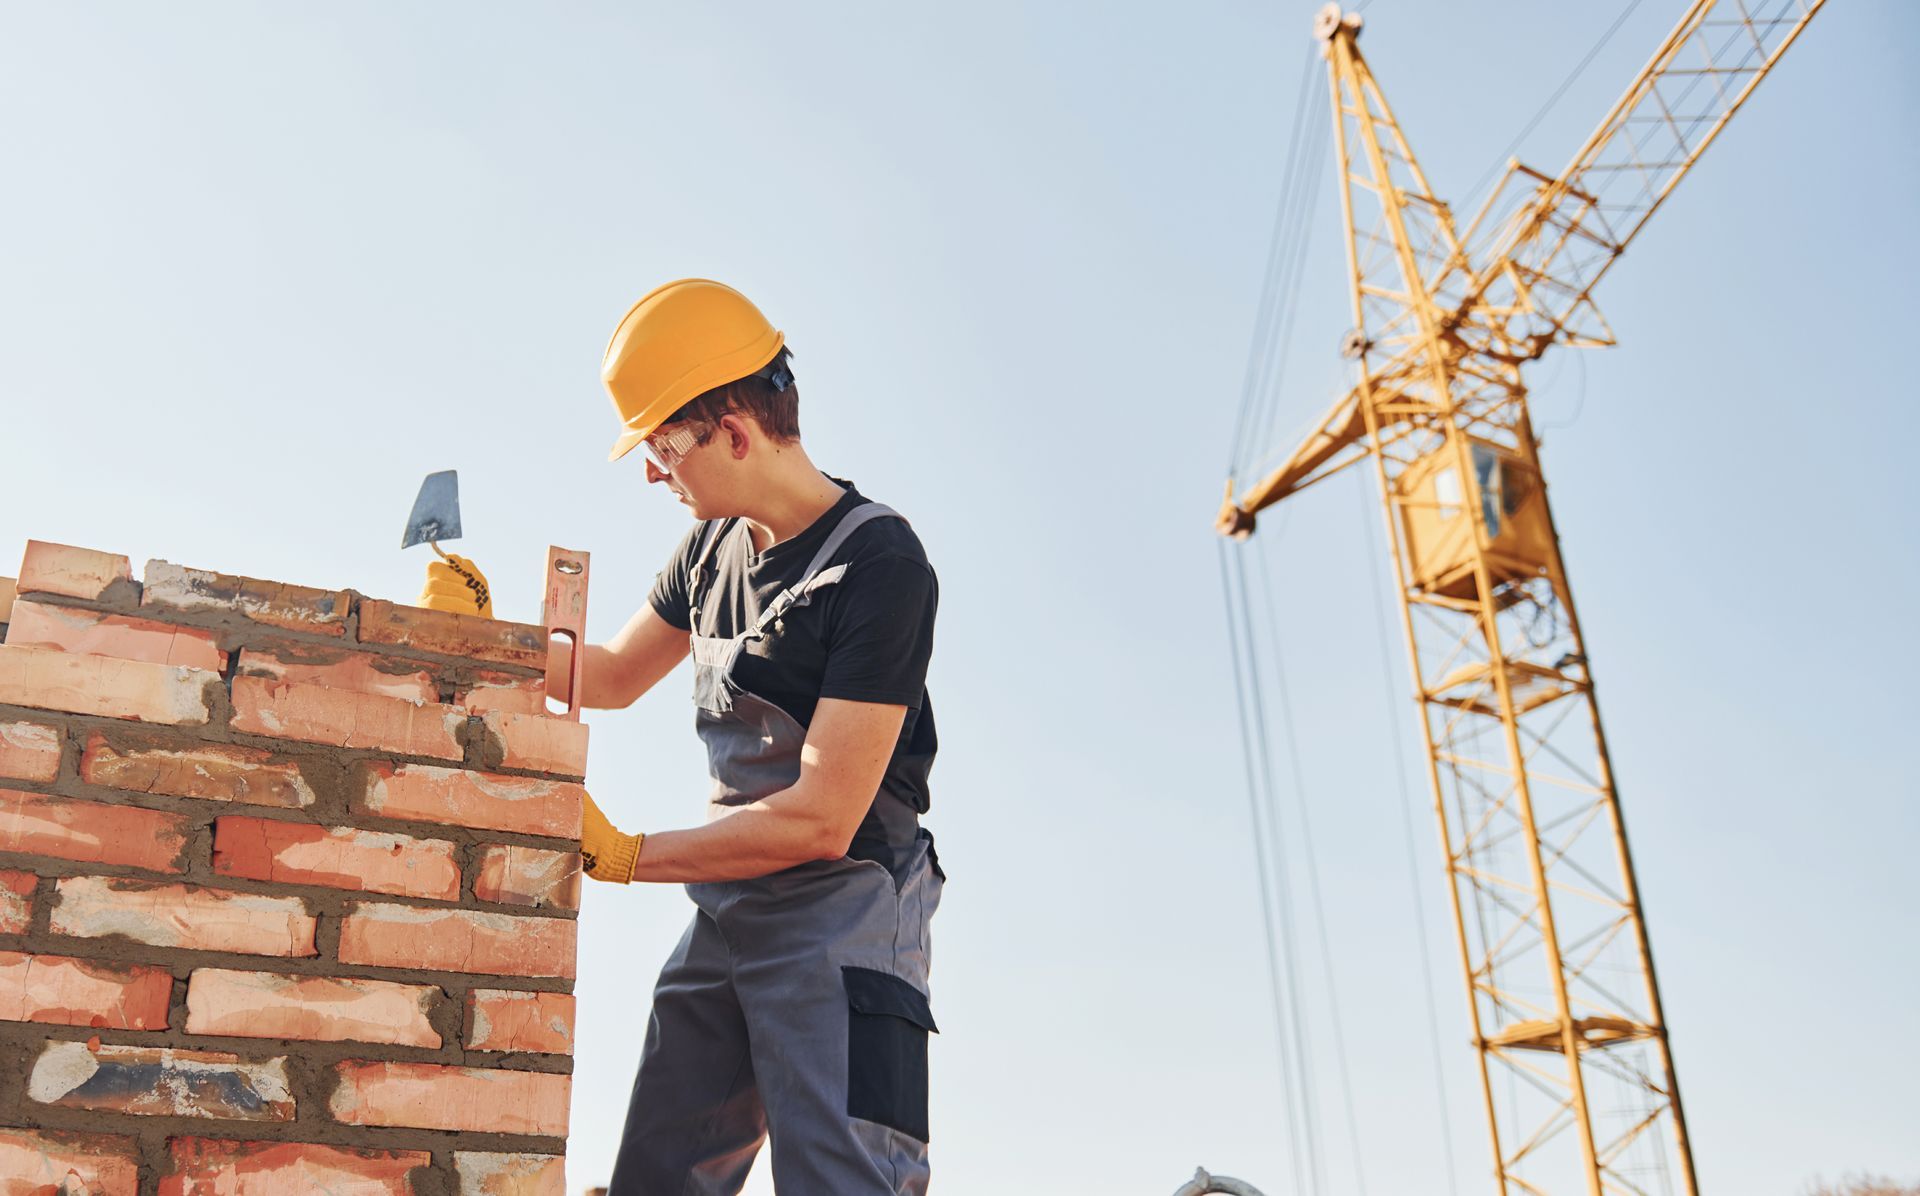 a man is working on a brick wall with a crane in the background